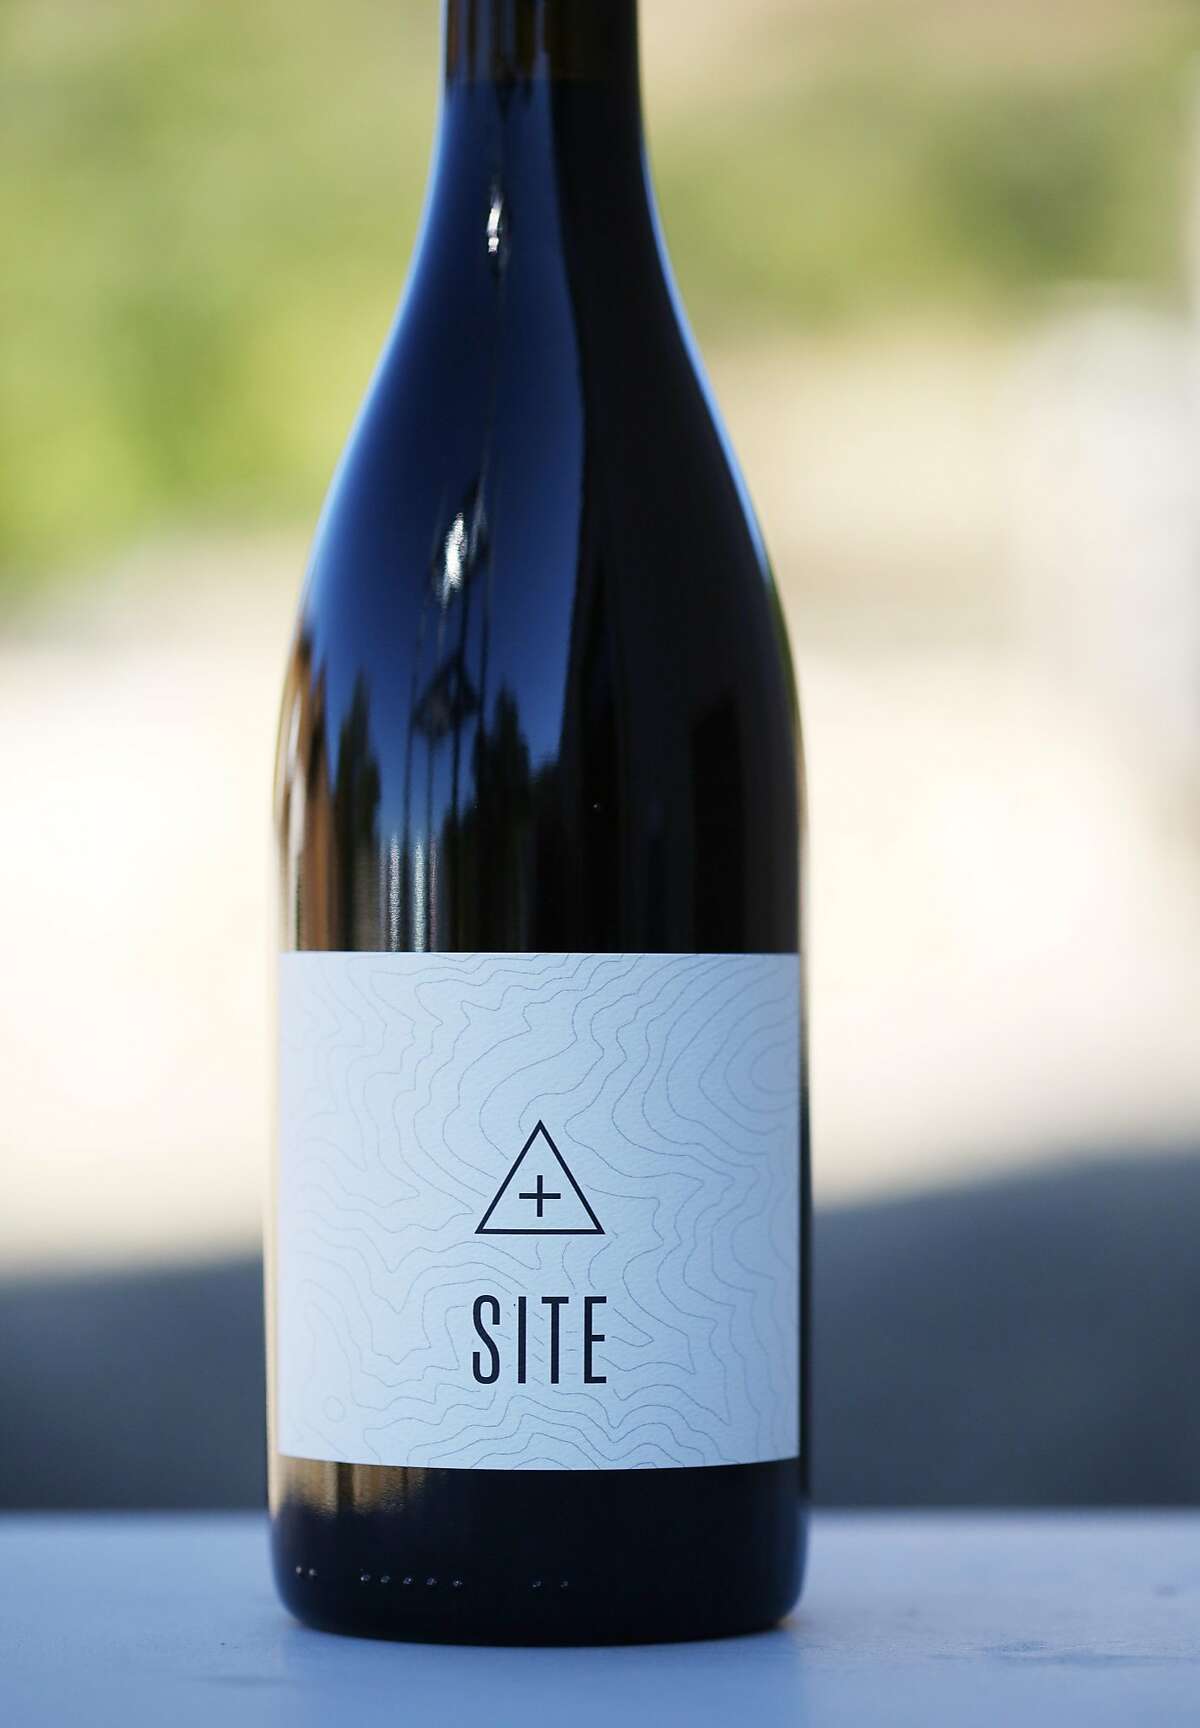 Site wines are a side project of winemaker Jeremy Weintraub at Adelaida Vineyards on Wednesday, 10/24, 2018 in Paso Robles, California.